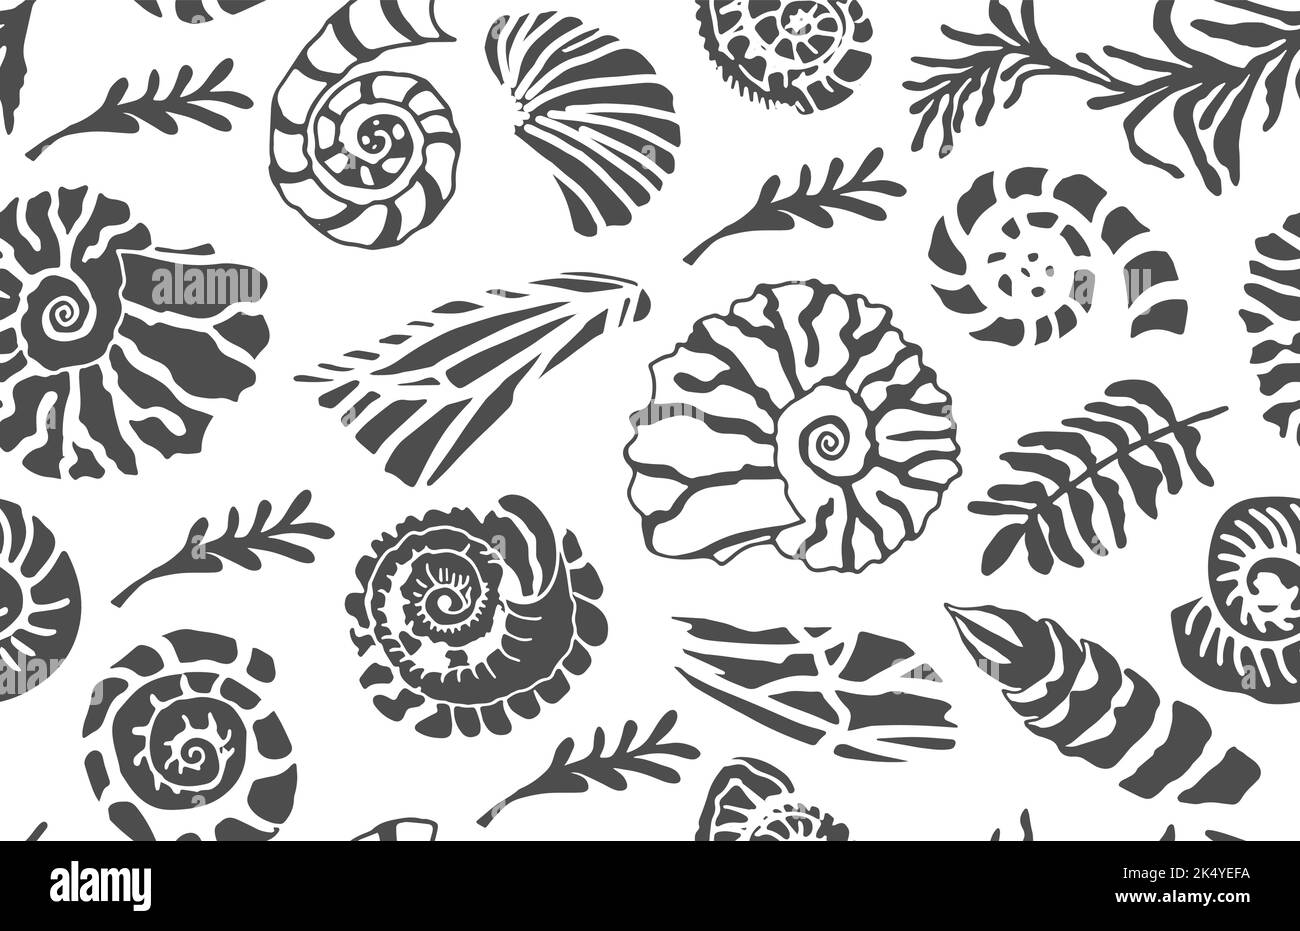 Black Stencil seashells and plants Seamless pattern Hand drawn art of ocean shell or conch mollusk scallop Sea underwater animal fossil Nautical and Stock Vector